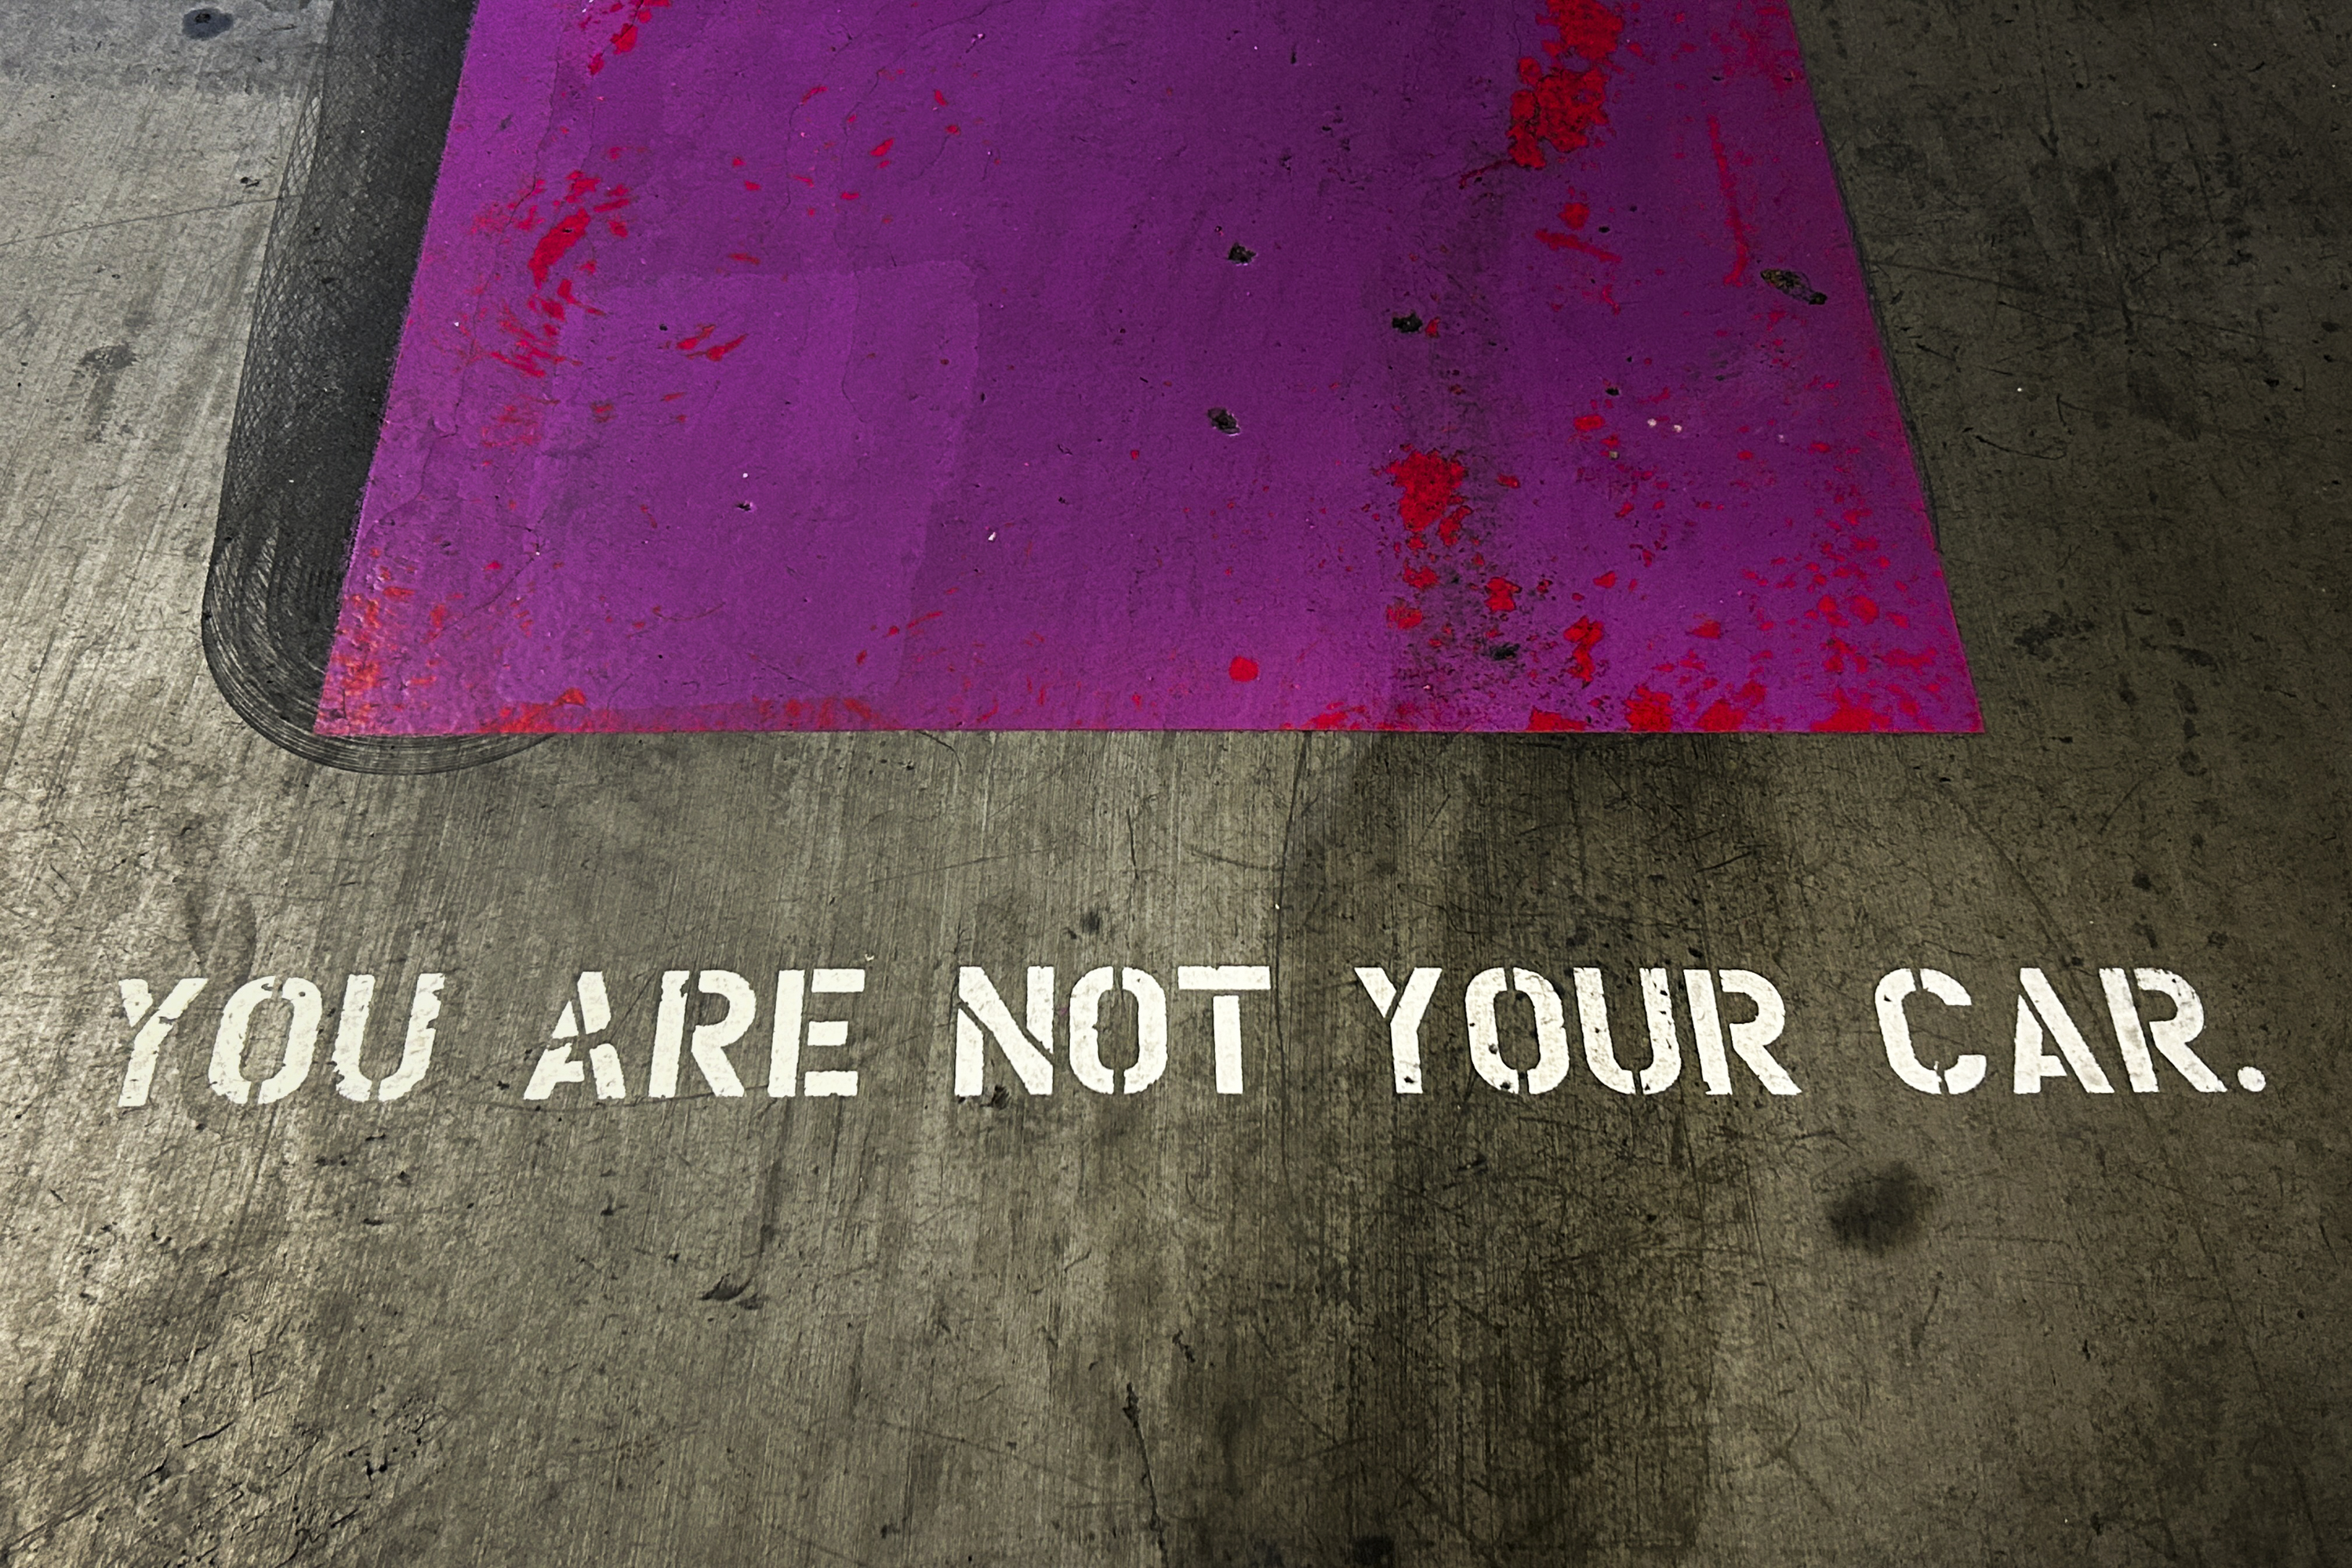 A purple parking spot with red splatters on a gray floor has &quot;YOU ARE NOT YOUR CAR&quot; stenciled in white.